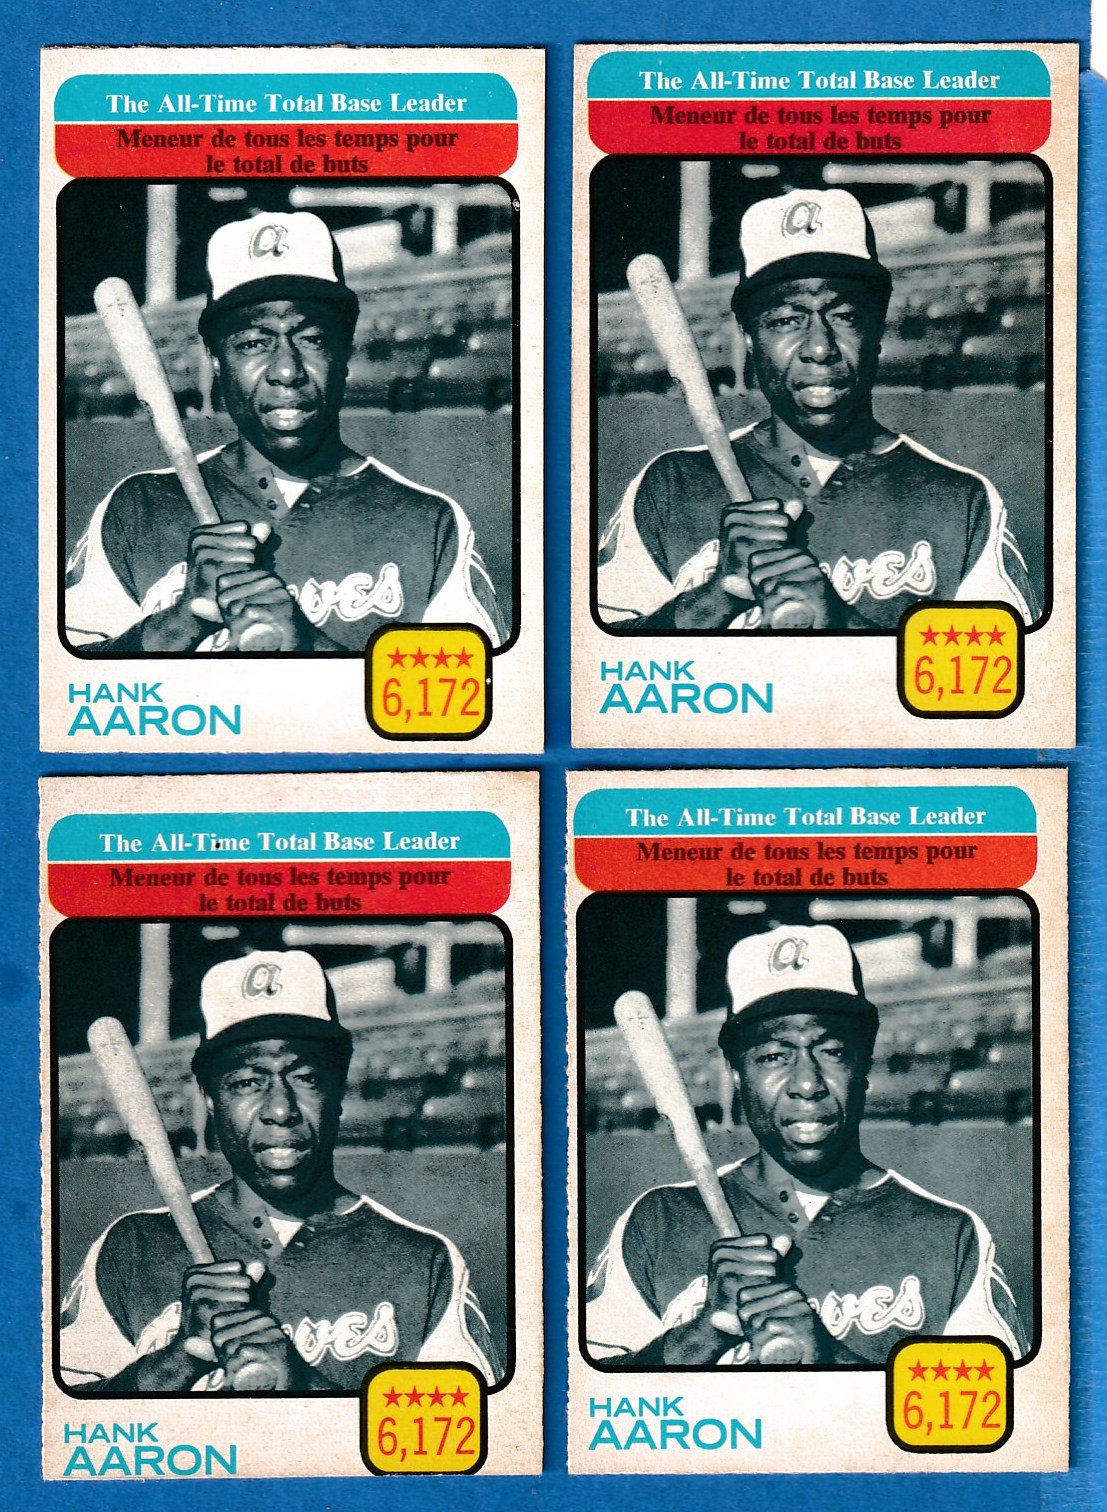 1973 O-Pee-Chee/OPC #473 Hank Aaron All-Time Leaders (6,172 Total Bases) Baseball cards value